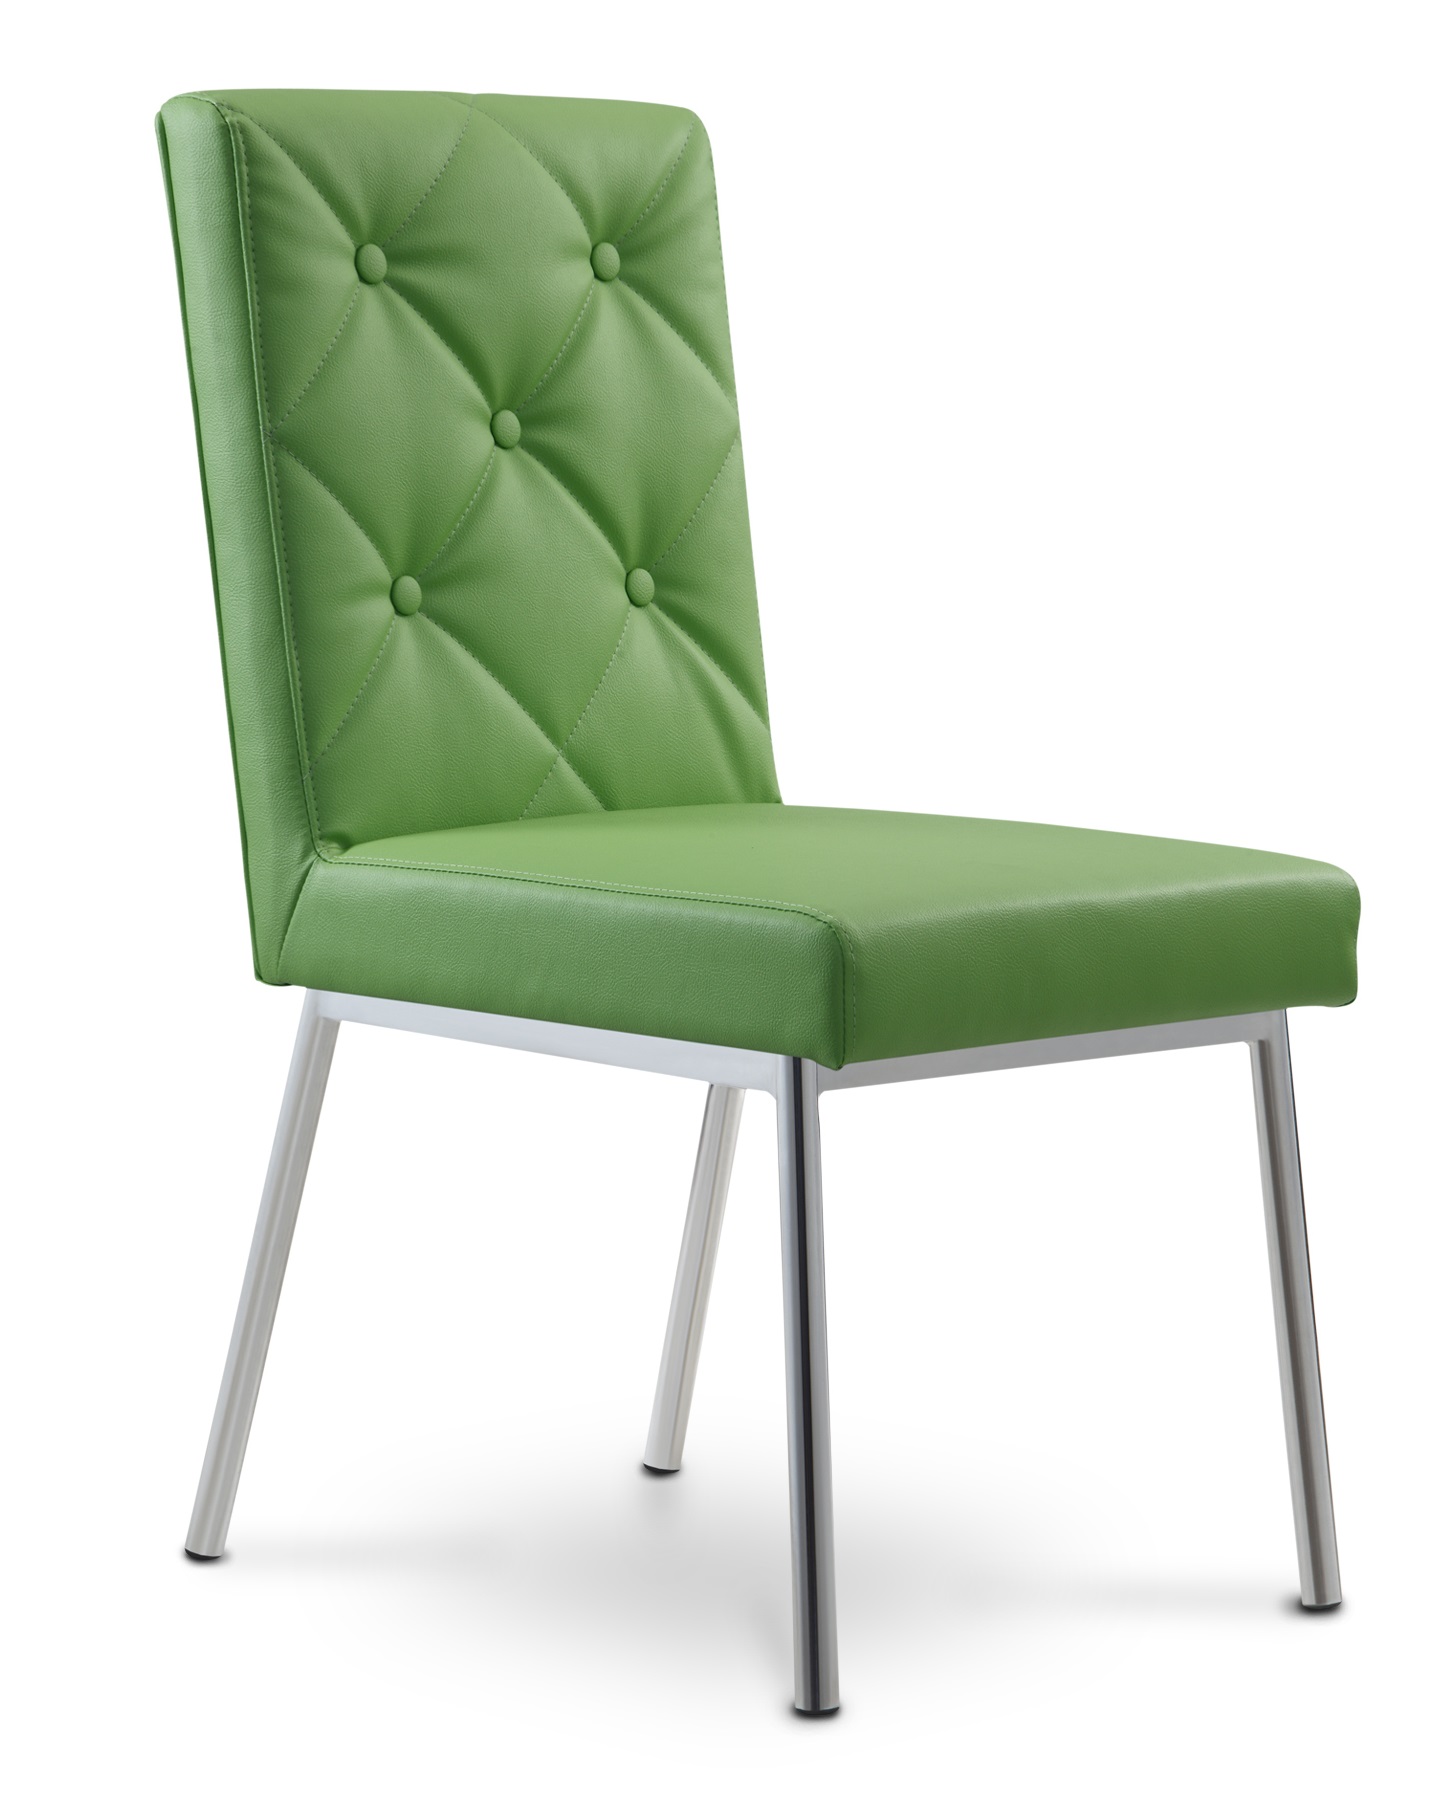 ZD 621 dining chair